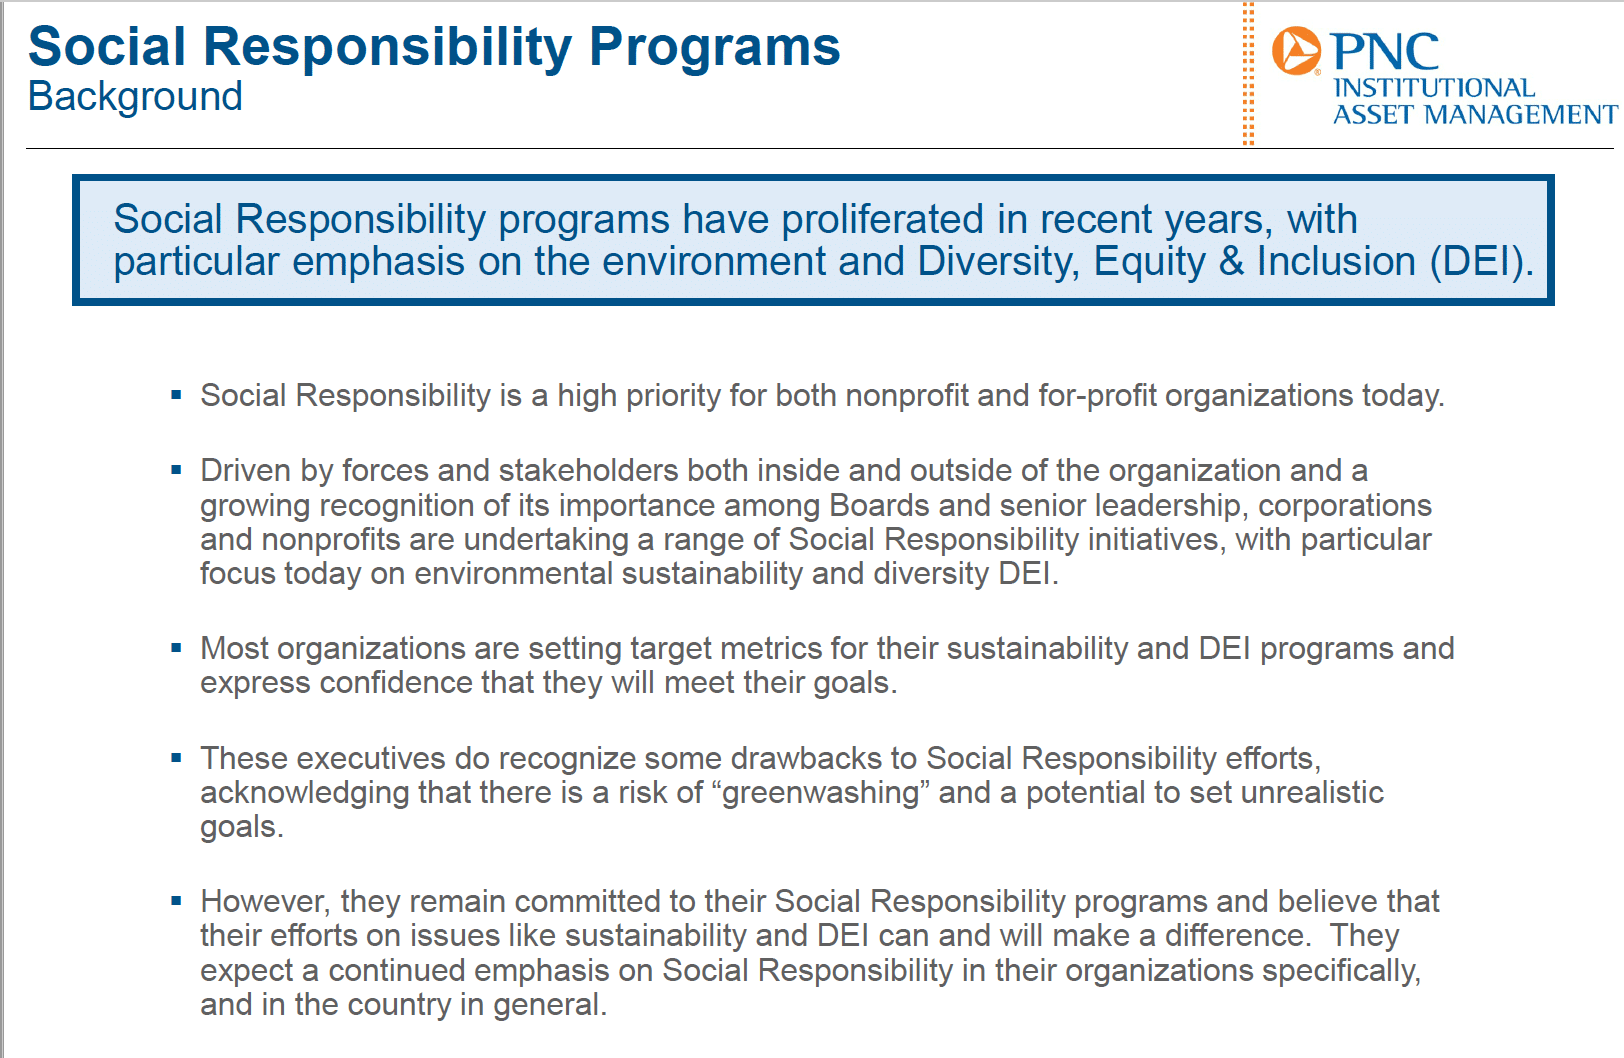 Social responsibility initiatives taking hold in all organizations: 9 in 10 say CSR is a priority